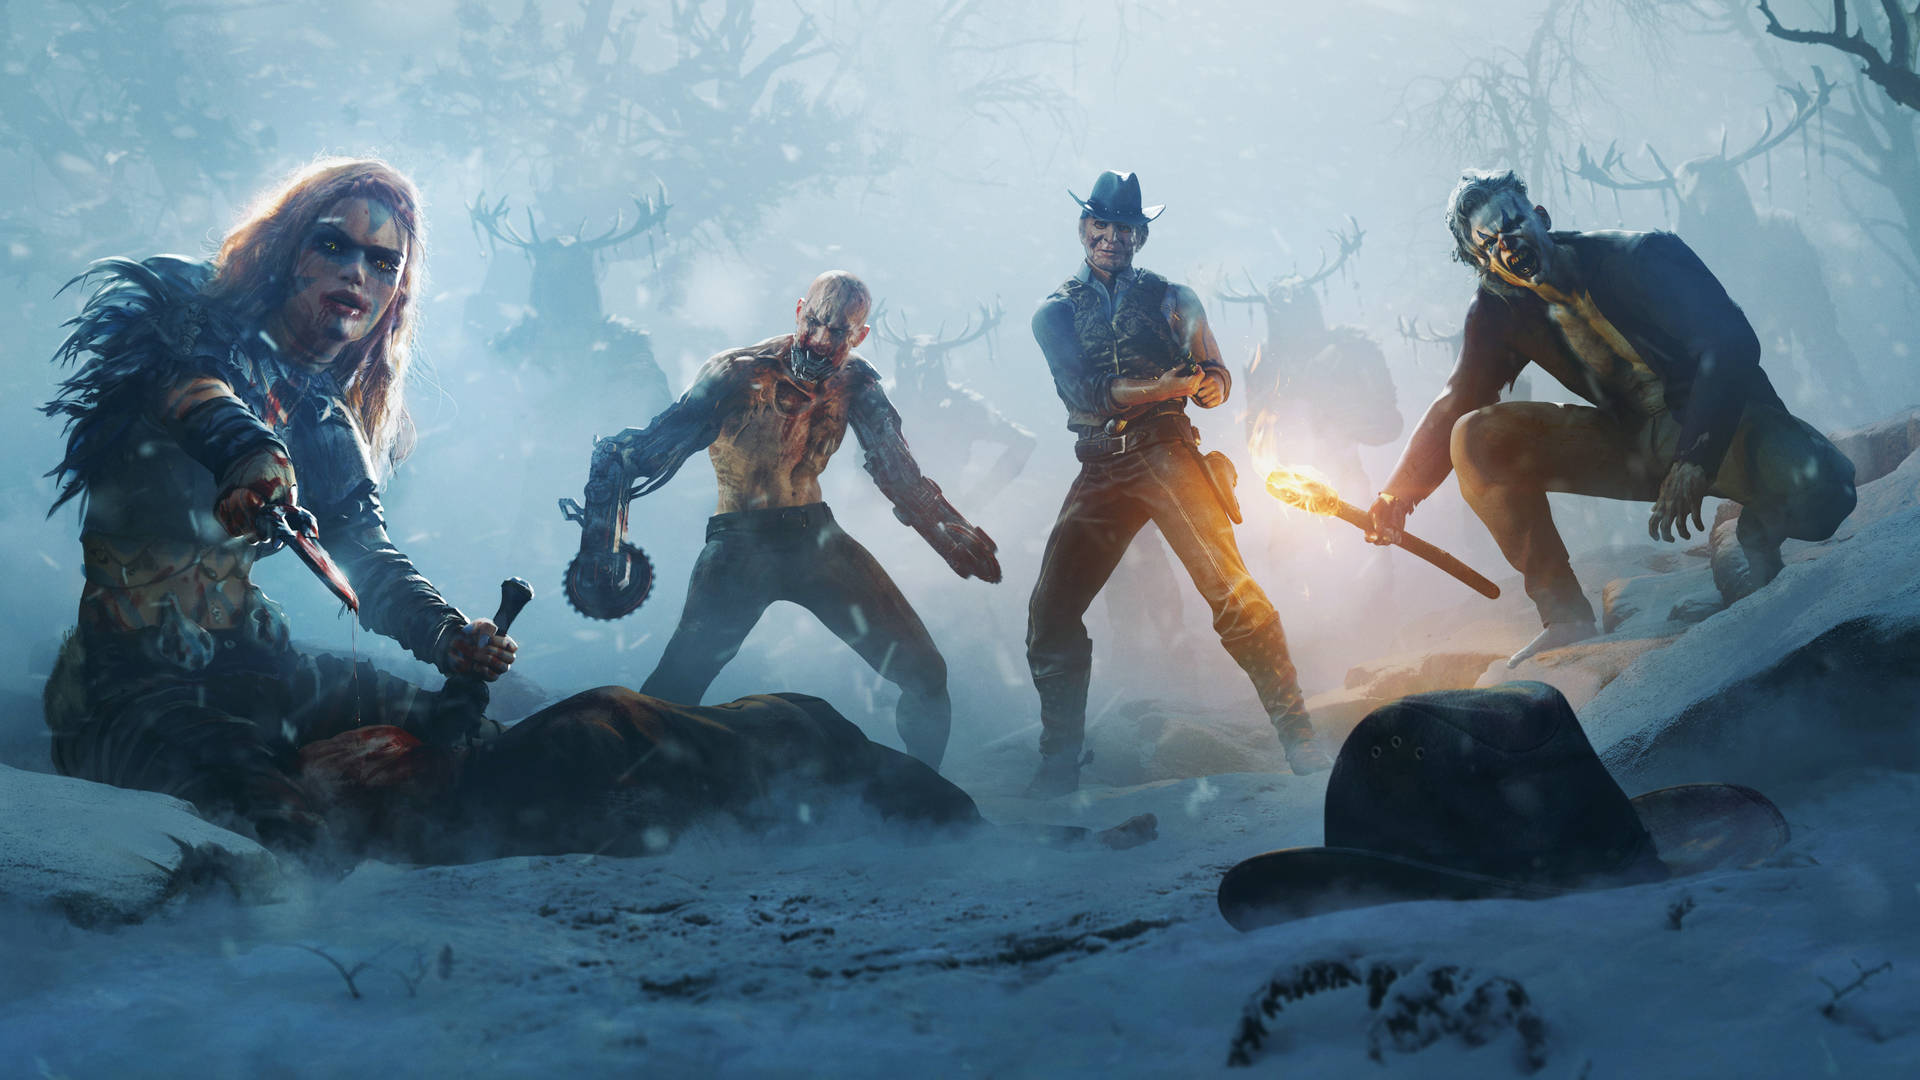 Wasteland Zombies In Snow Background